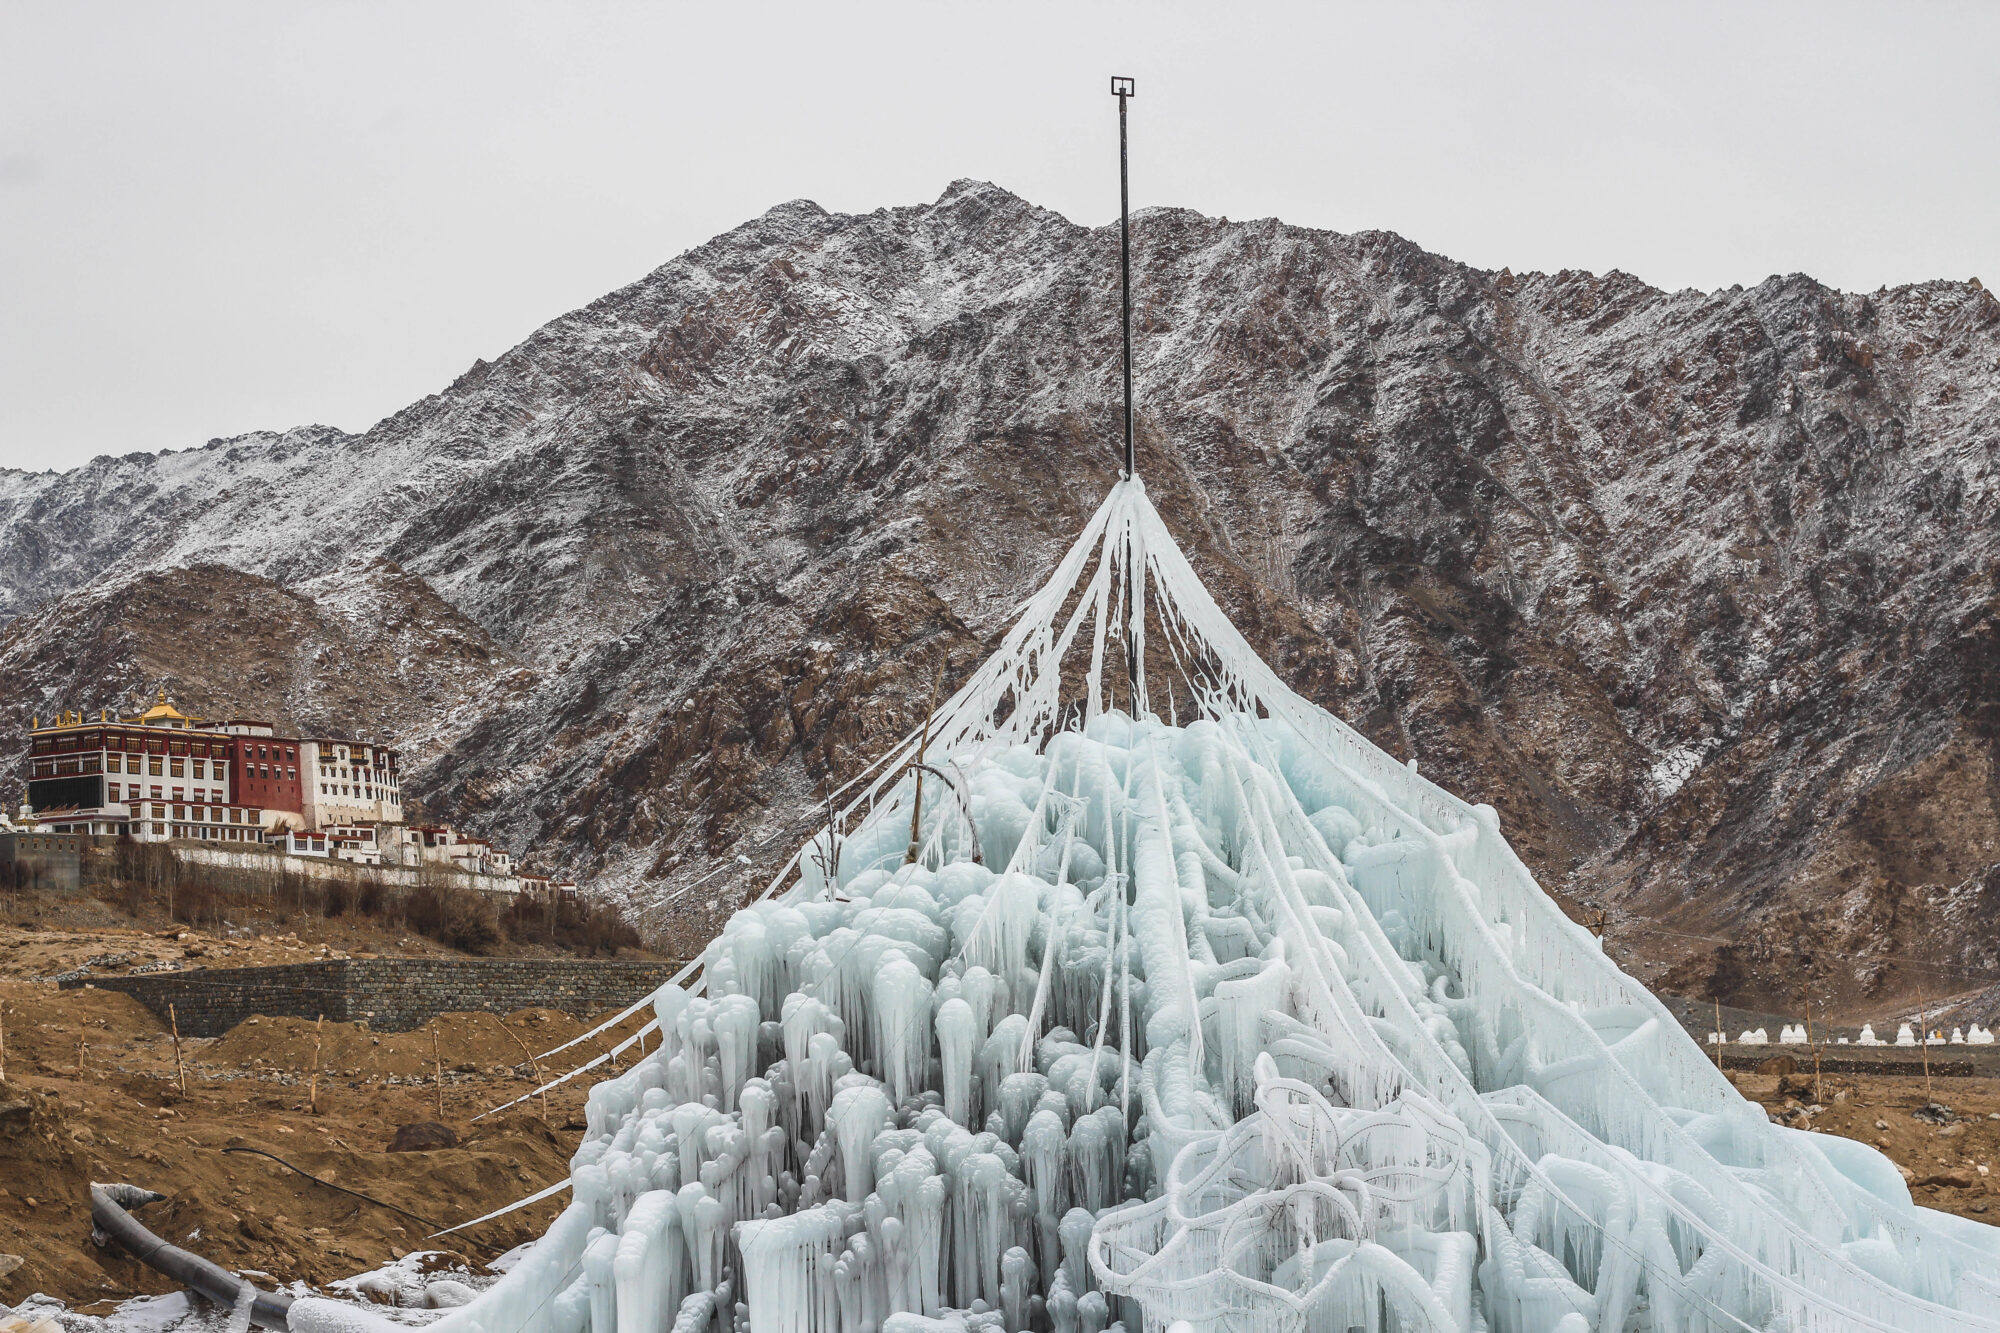 An early prototype of artificial glacier, named Ice Stupa - the device appears like a sculpture, with long lines of icicles rising up to a central pole. Beneath this large clusters of ice form in unusual shapes, some spirals of ice, others large clumps of ice with thick icicles dripping down.